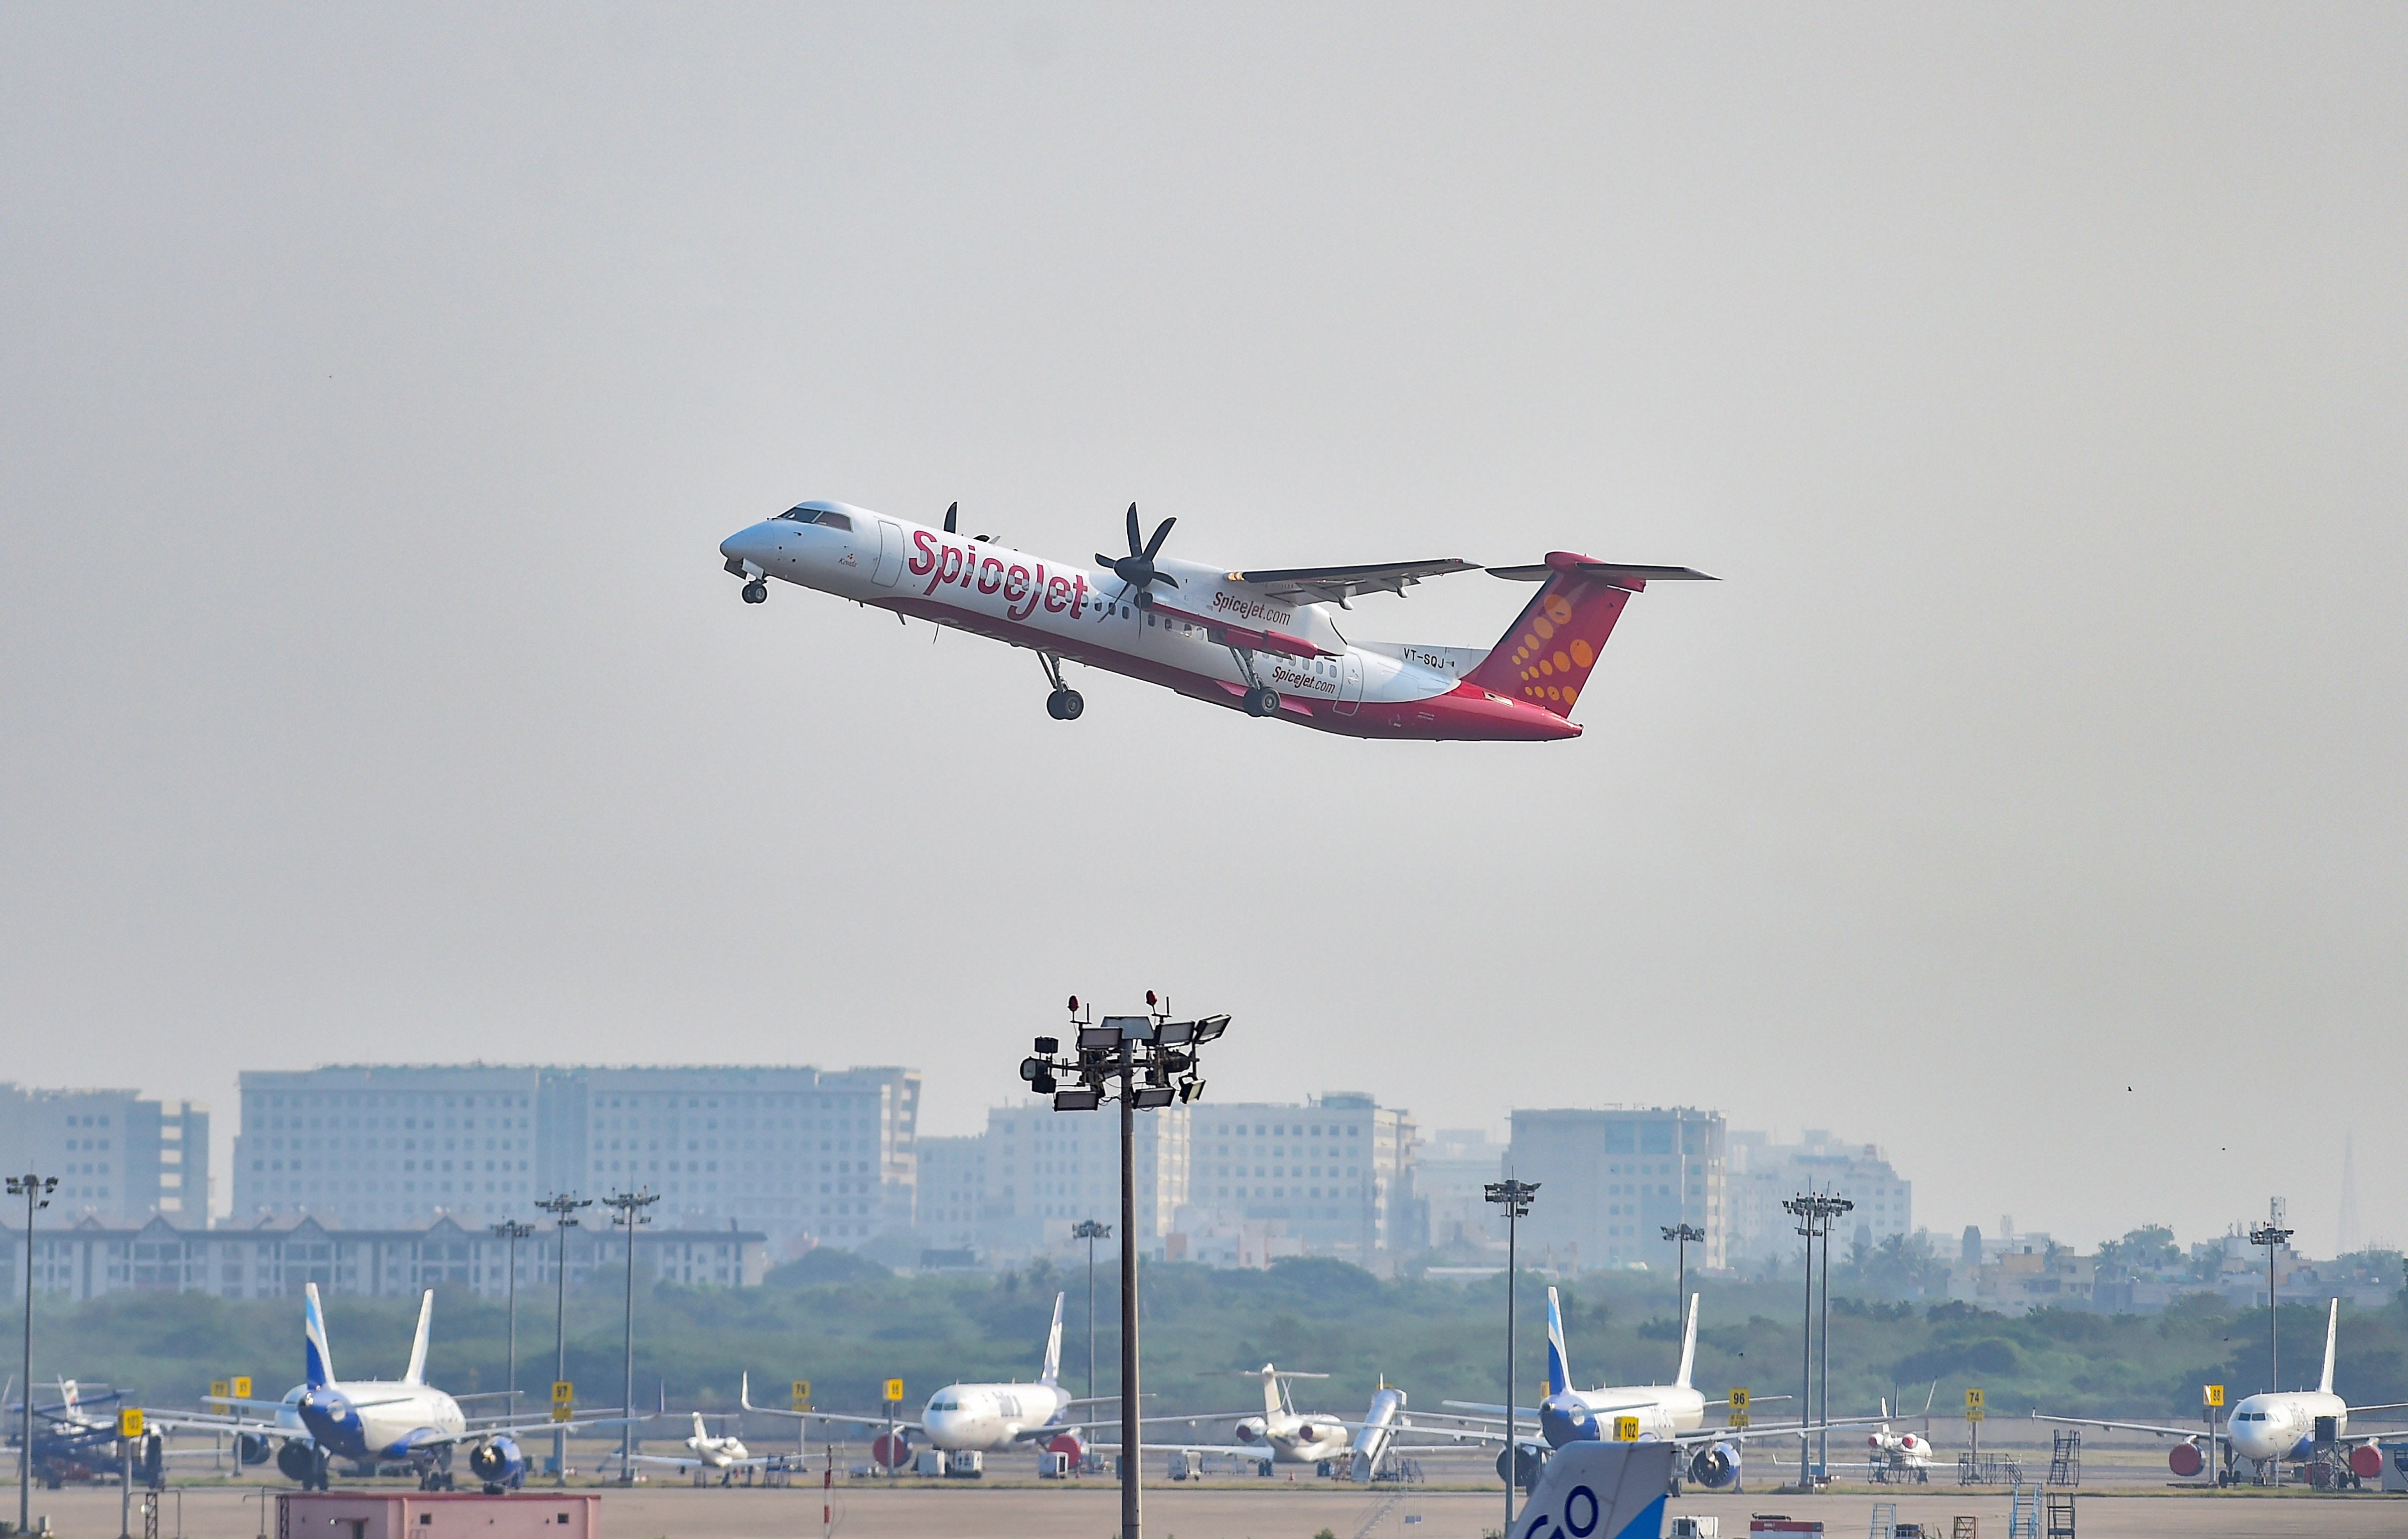 Chennai: A SpiceJet plane takes-off from Chennai airport for domestic travel, after flights resumed during the ongoing nationwide lockdown, in Chennai, Monday, May 25, 2020. All scheduled commercial passenger flights were suspended since March 25 when the government imposed a nationwide lockdown to curb the coronavirus pandemic. (PTI Photo/R Senthil Kumar)(PTI25-05-2020_000114B)